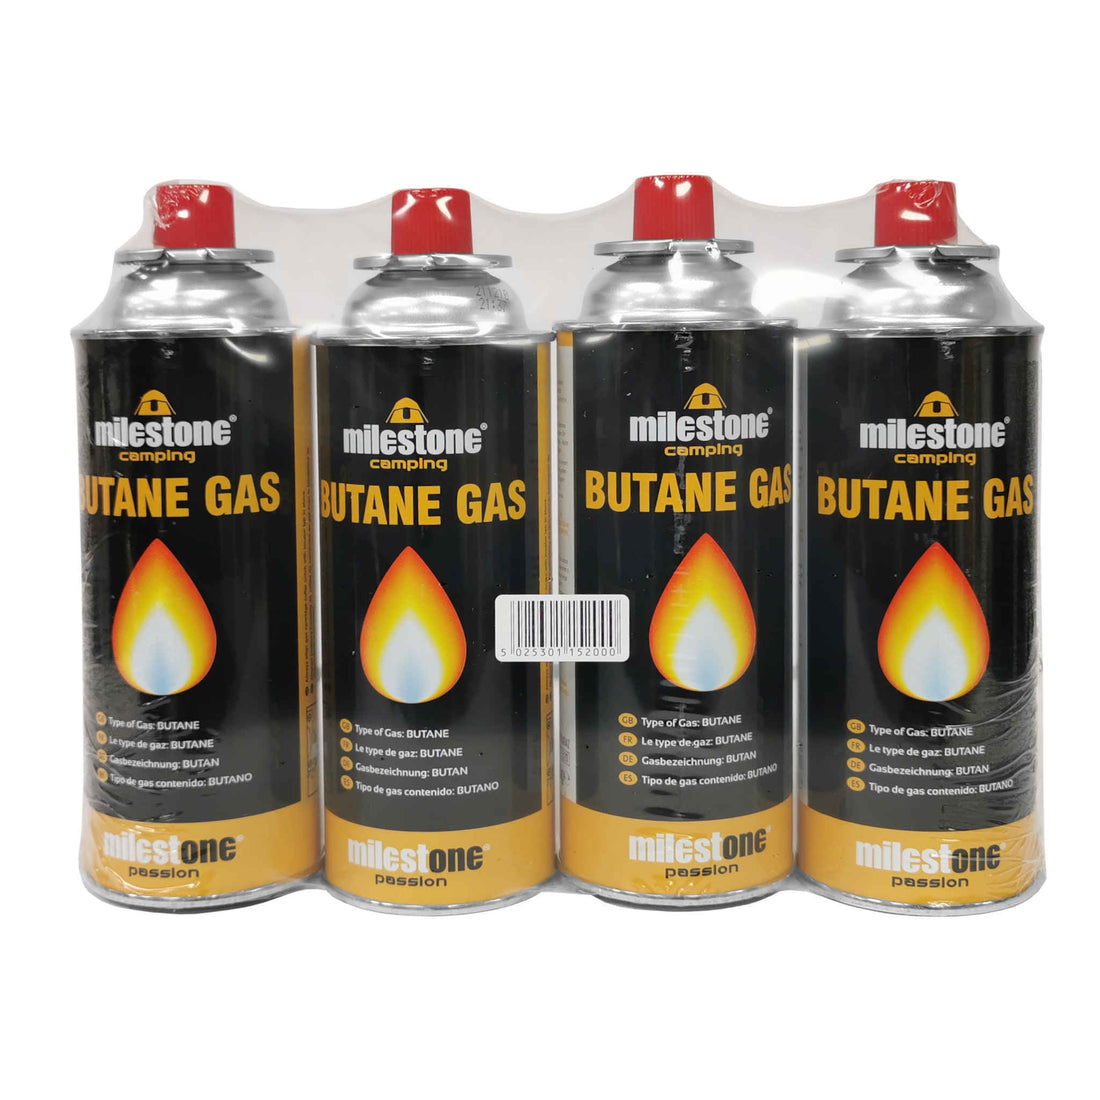 Milestone Camping Butane Gas Canister 220g | 4 Pack